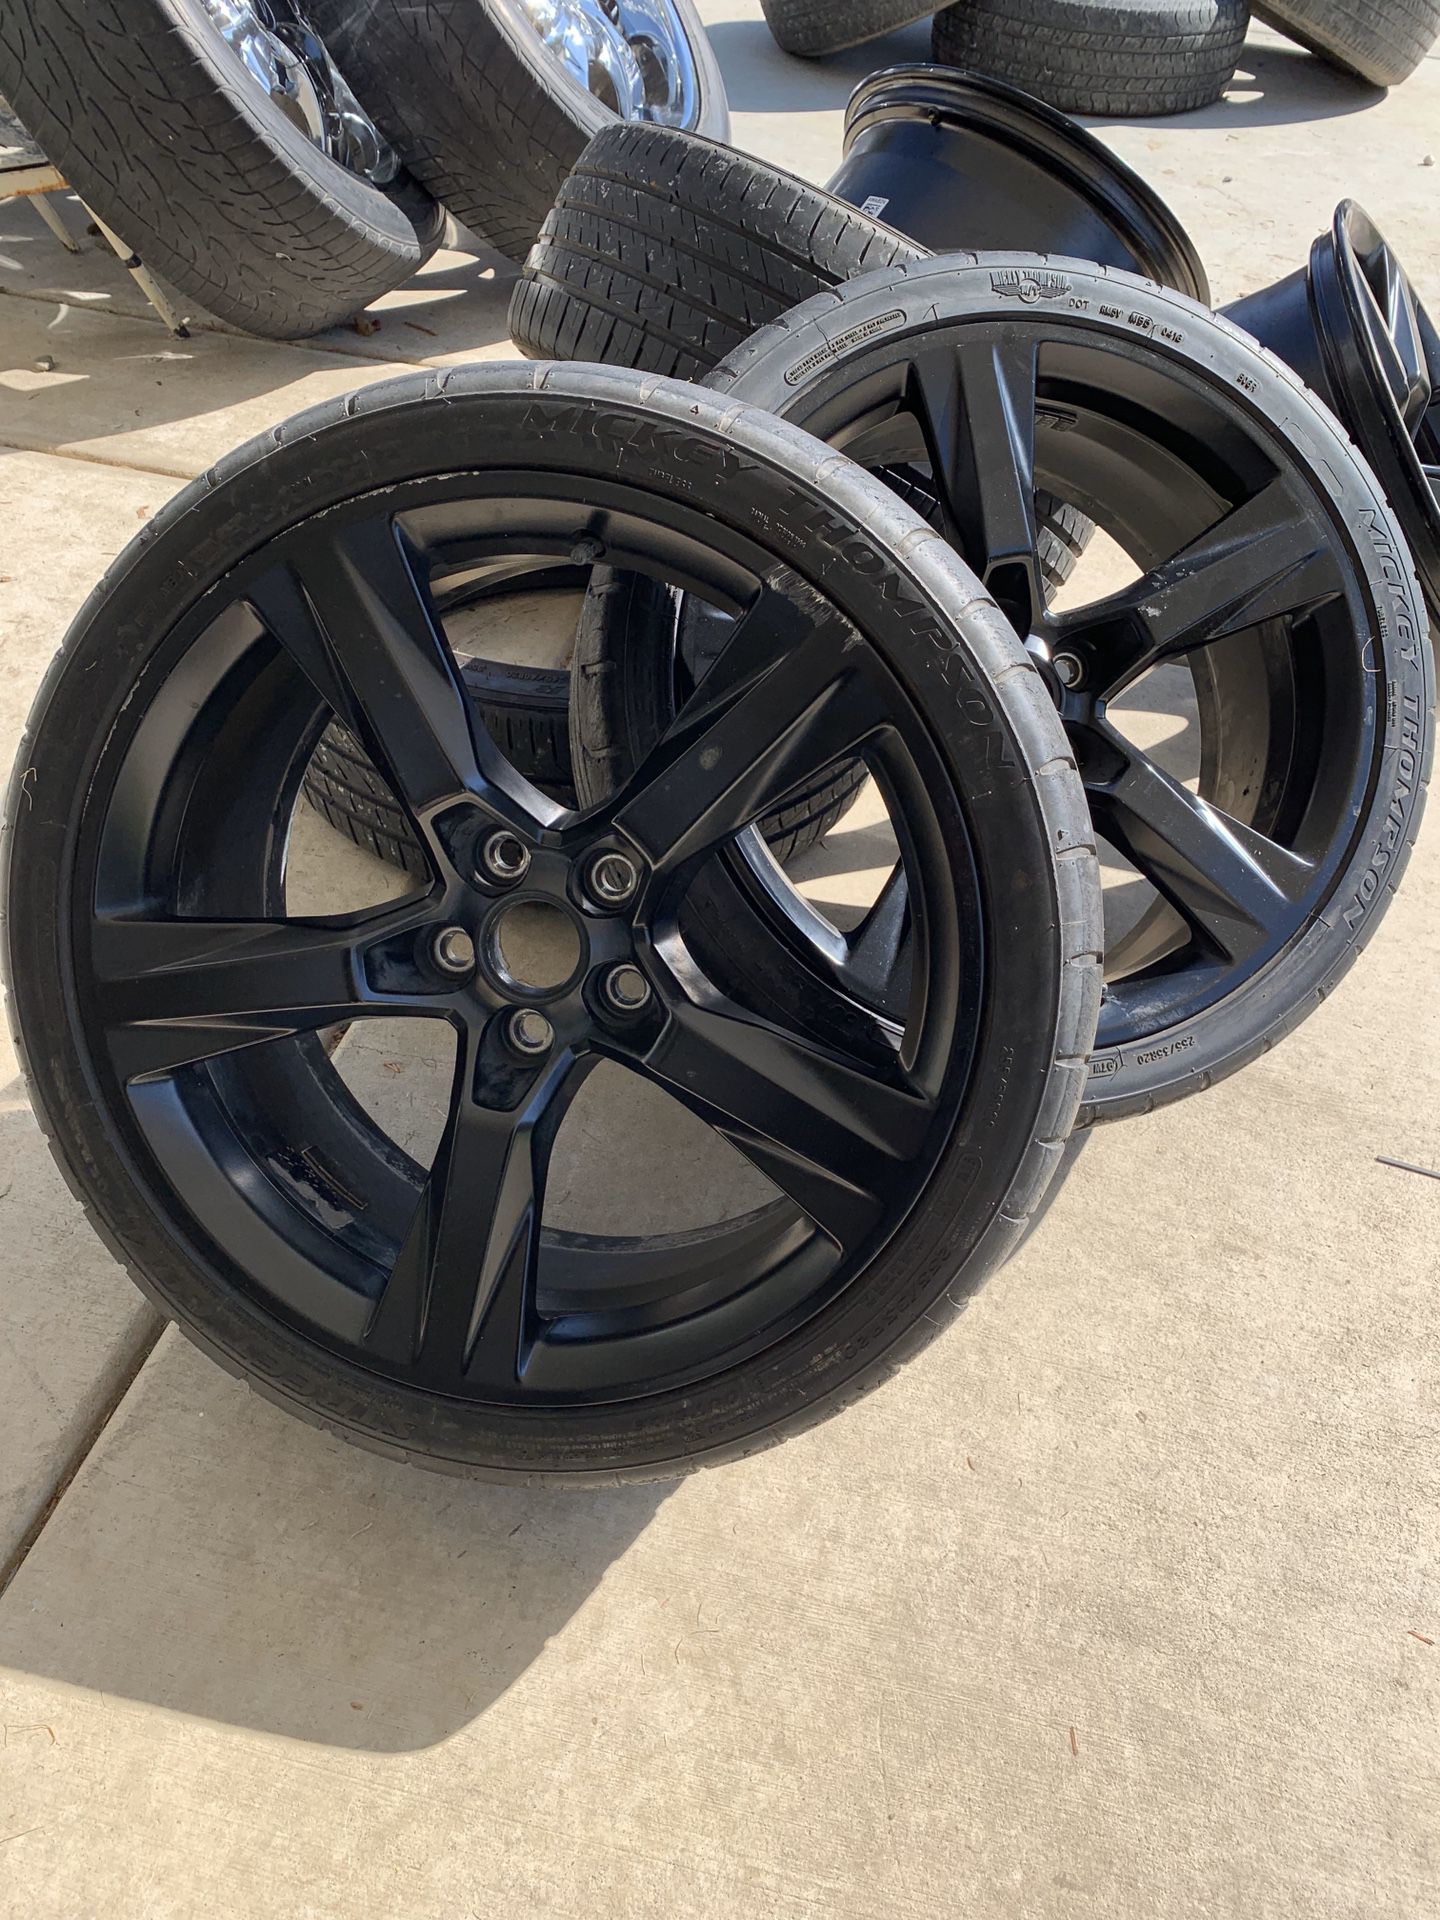 Rims and Tires